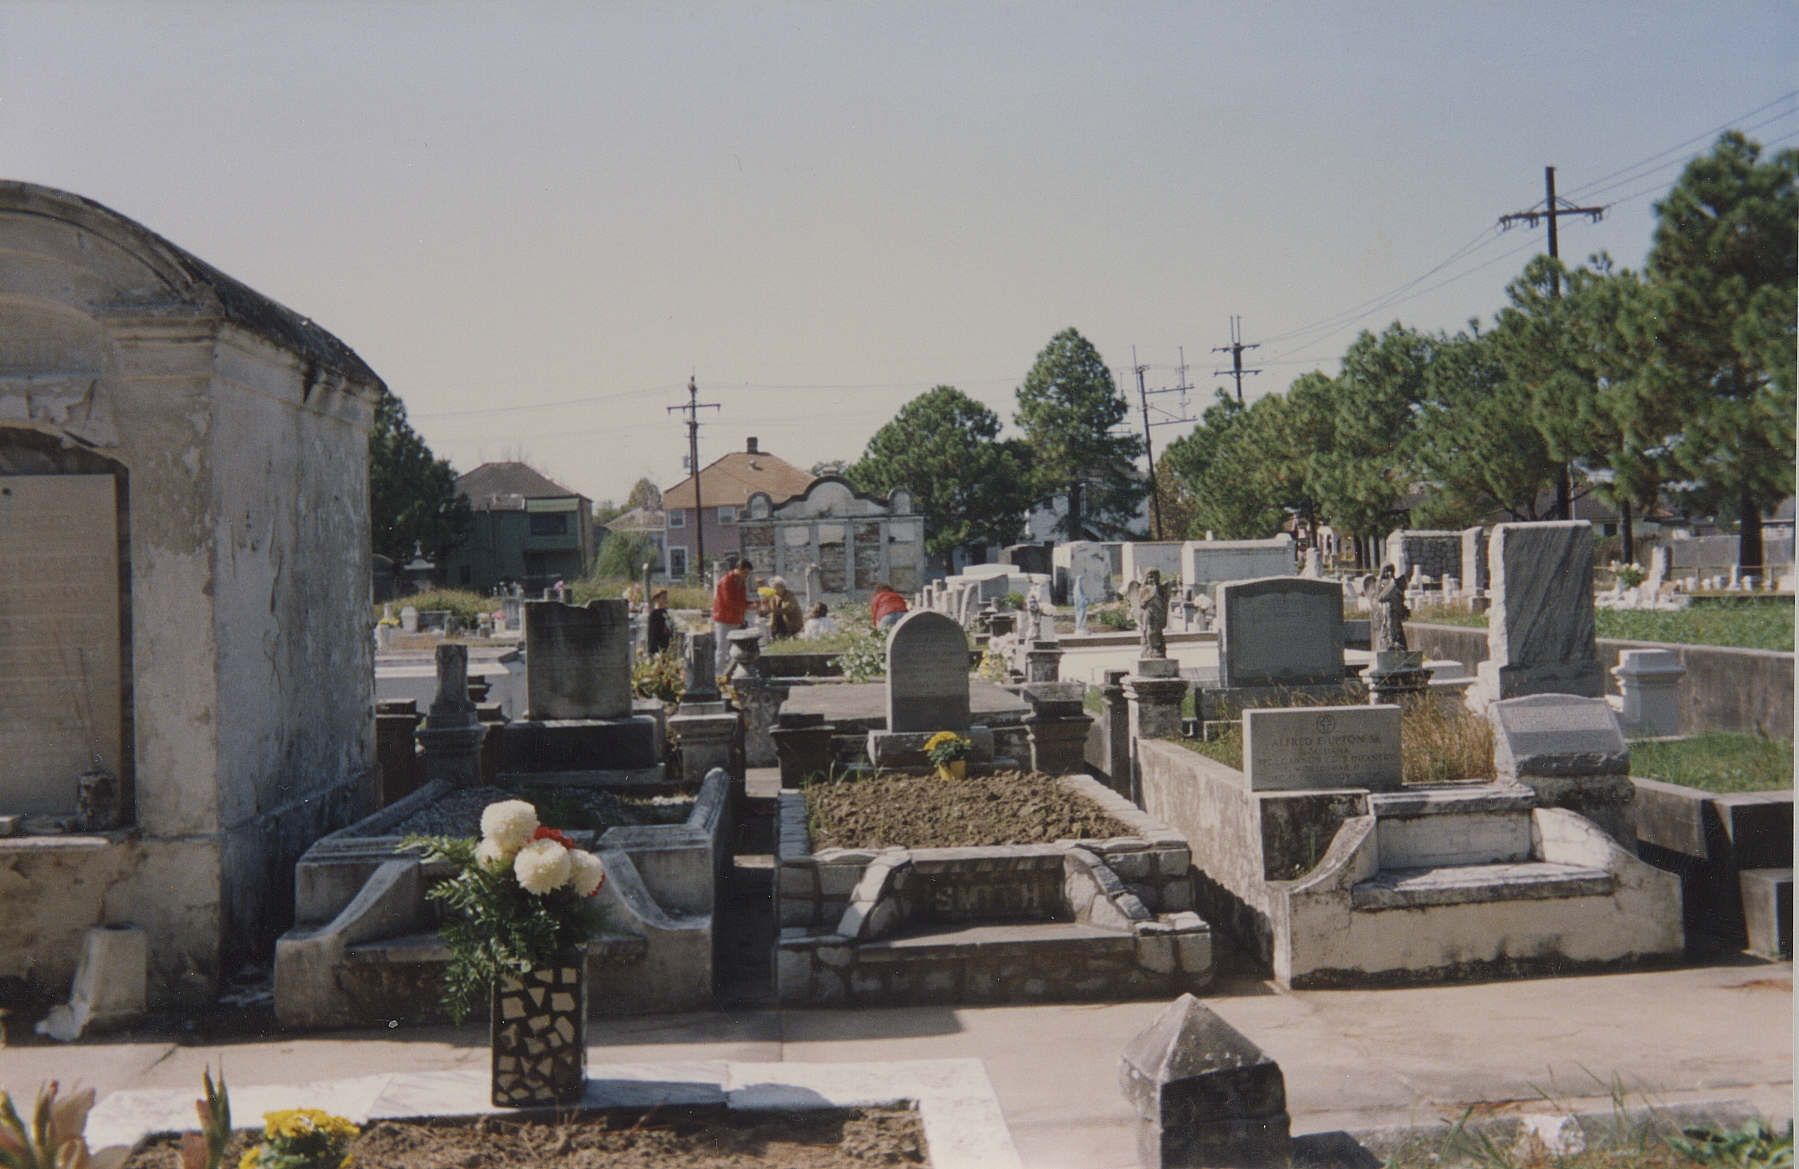 old cemetery, showing graves and flowers in a pot